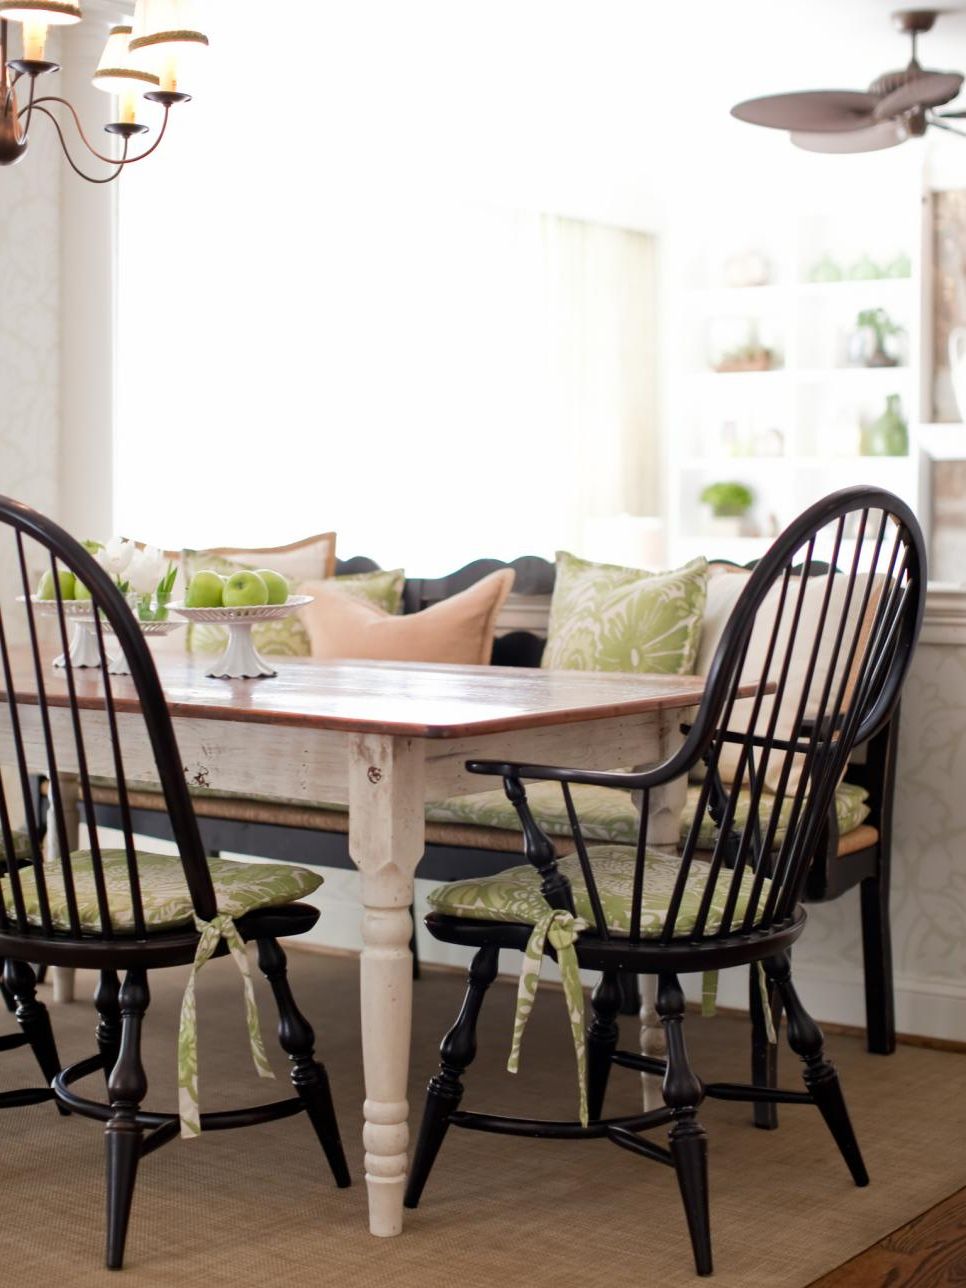 Black Windsor Chairs Around Country Dining Table (View 17 of 20)